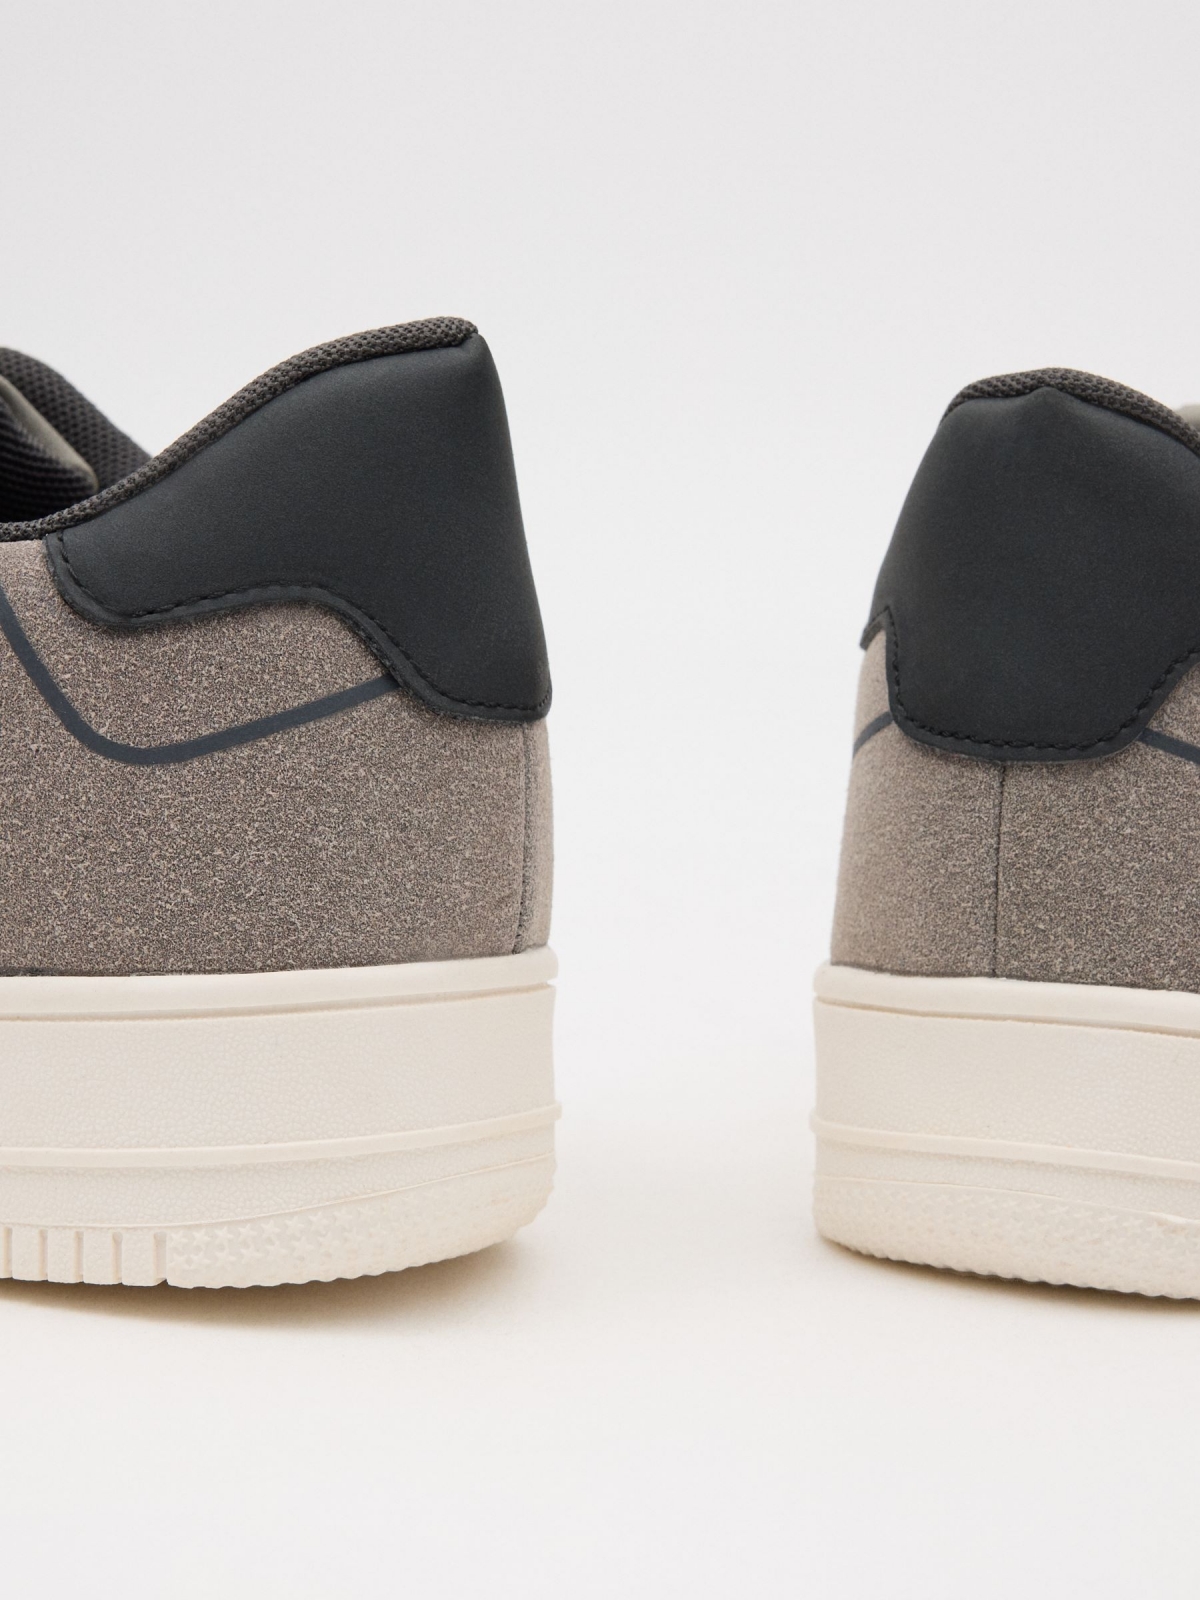 Grey combined casual sneaker detail view